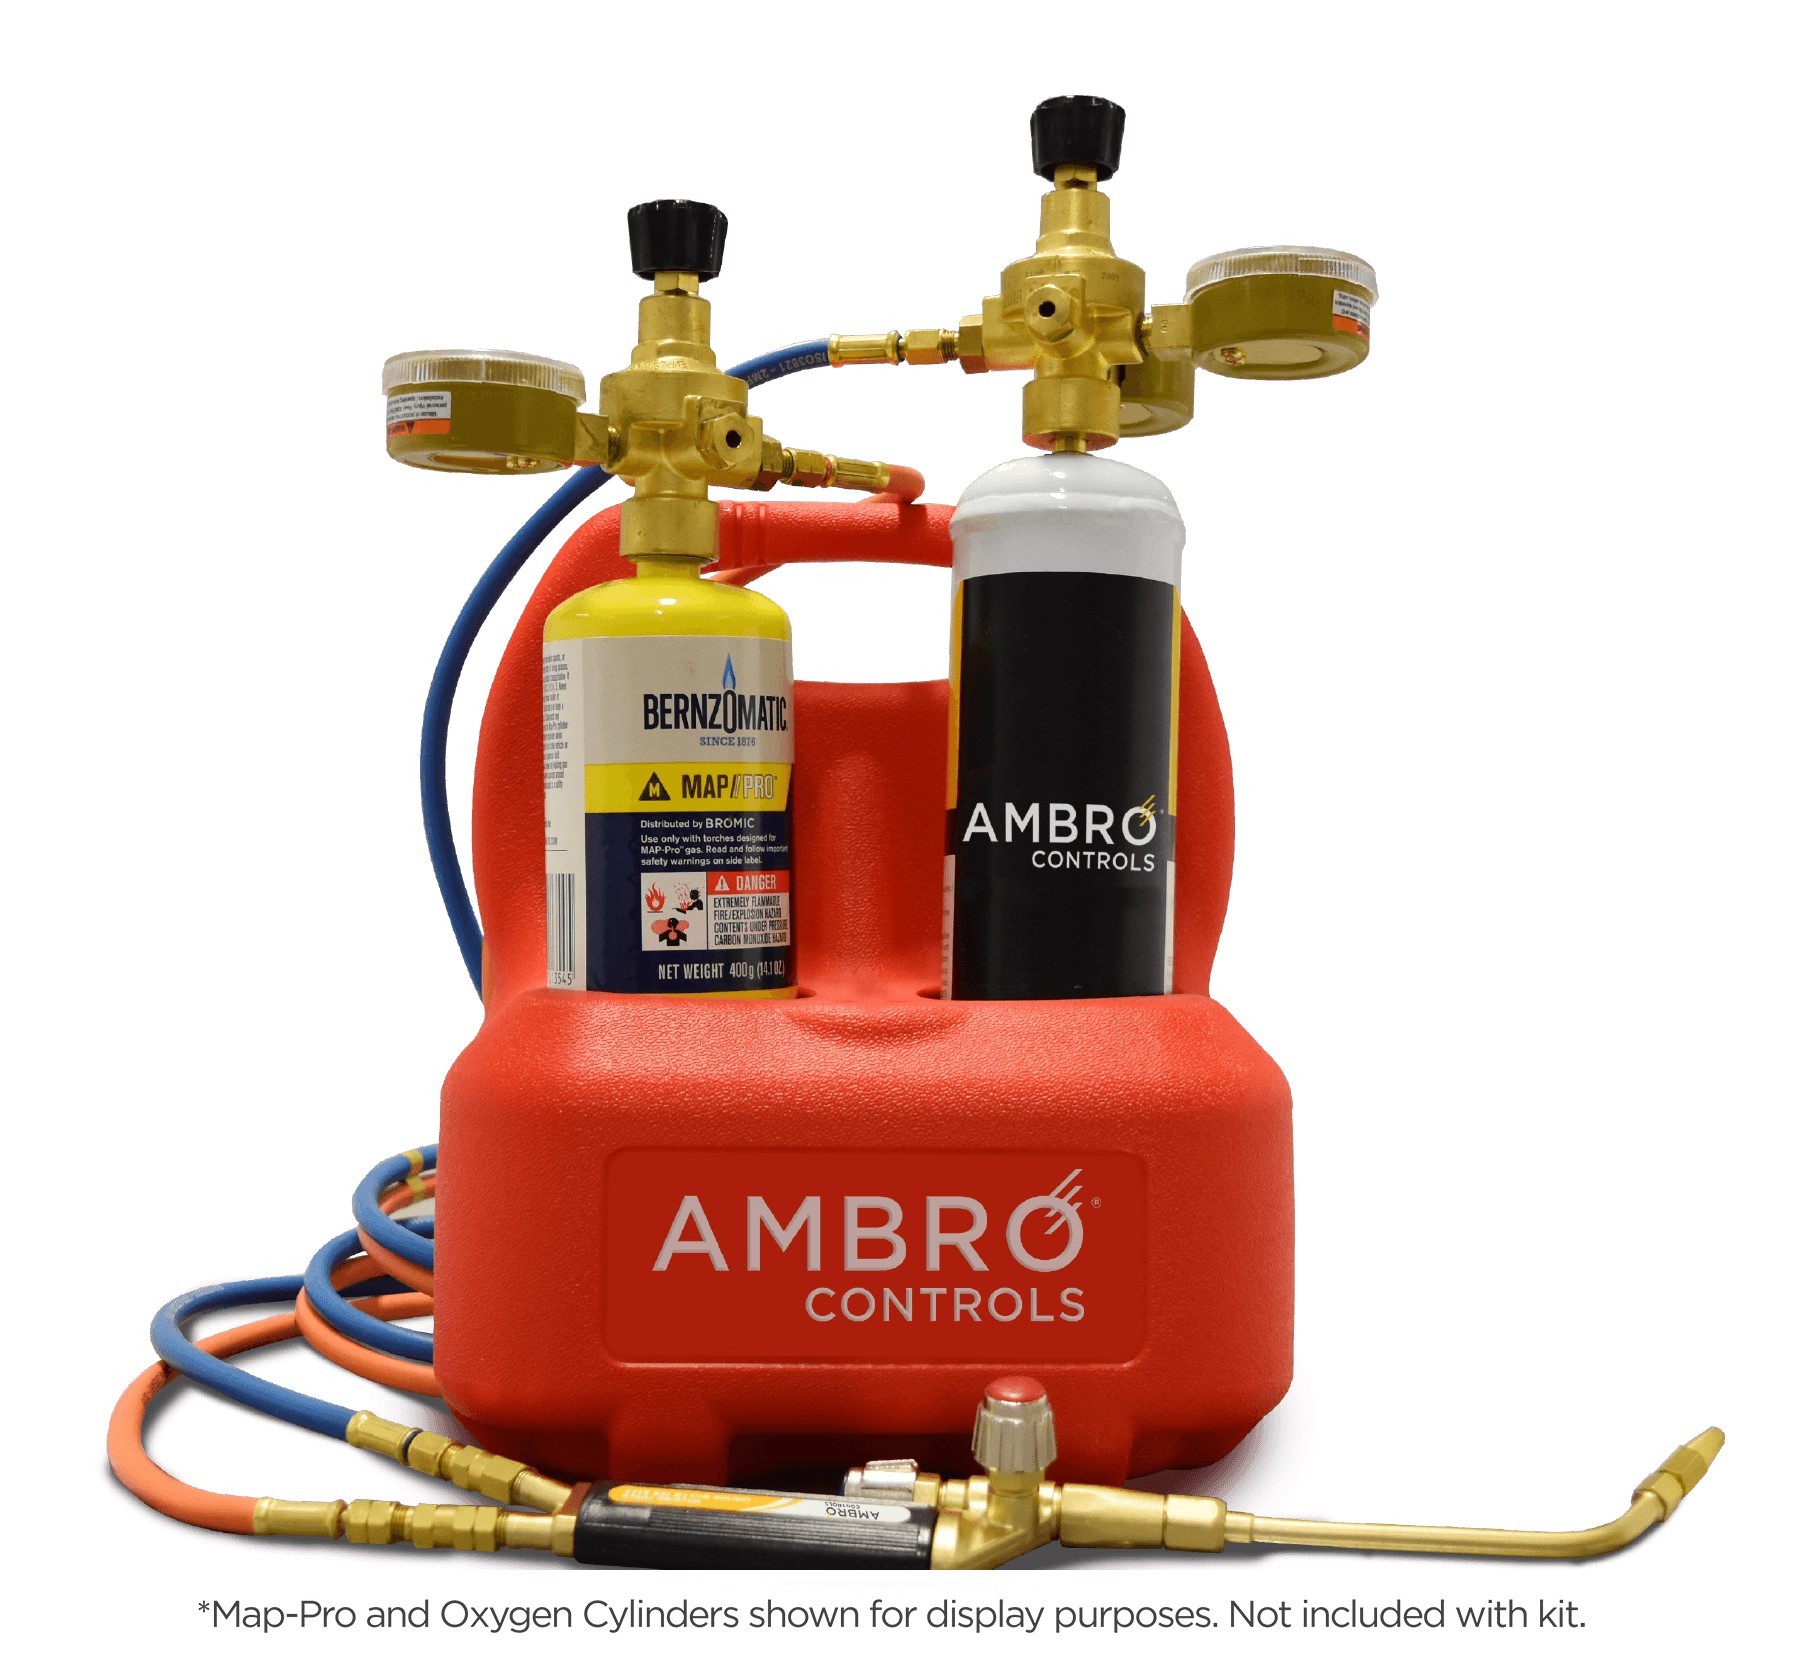 Ambro OxySet Mobile Brazing System for Welding, Brazing, Soldering